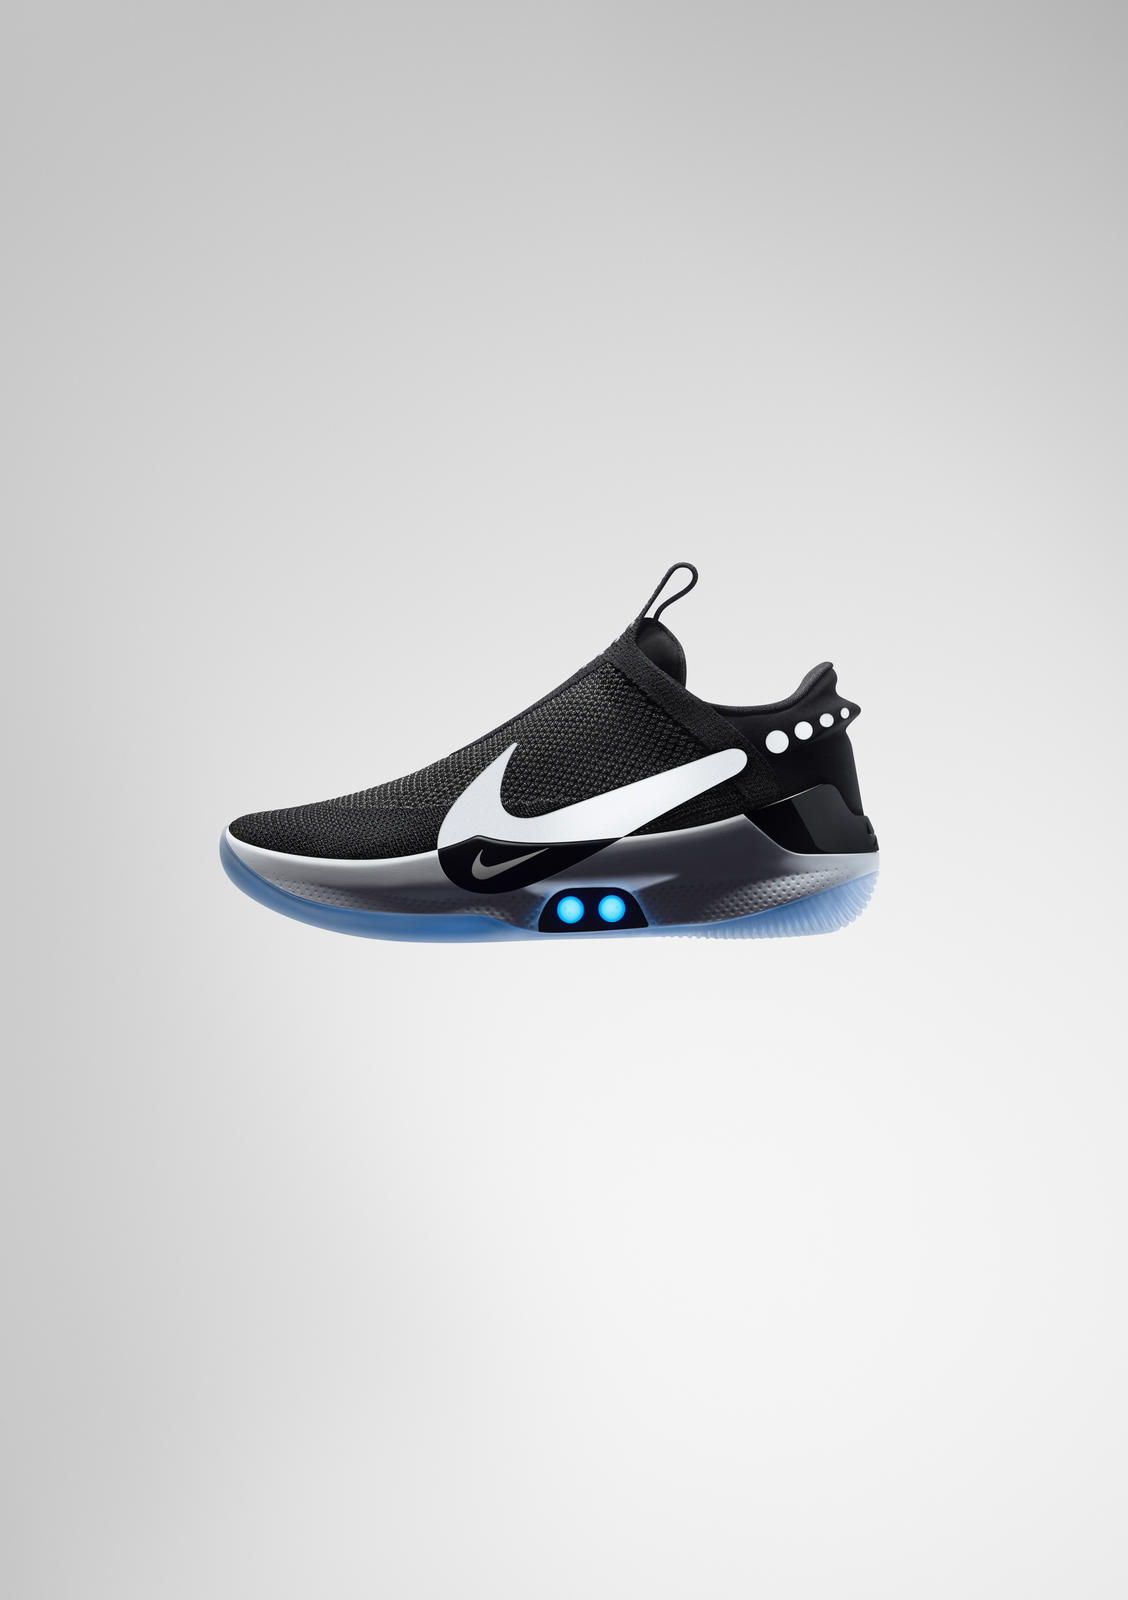 Introducing the Nike Adapt BB 